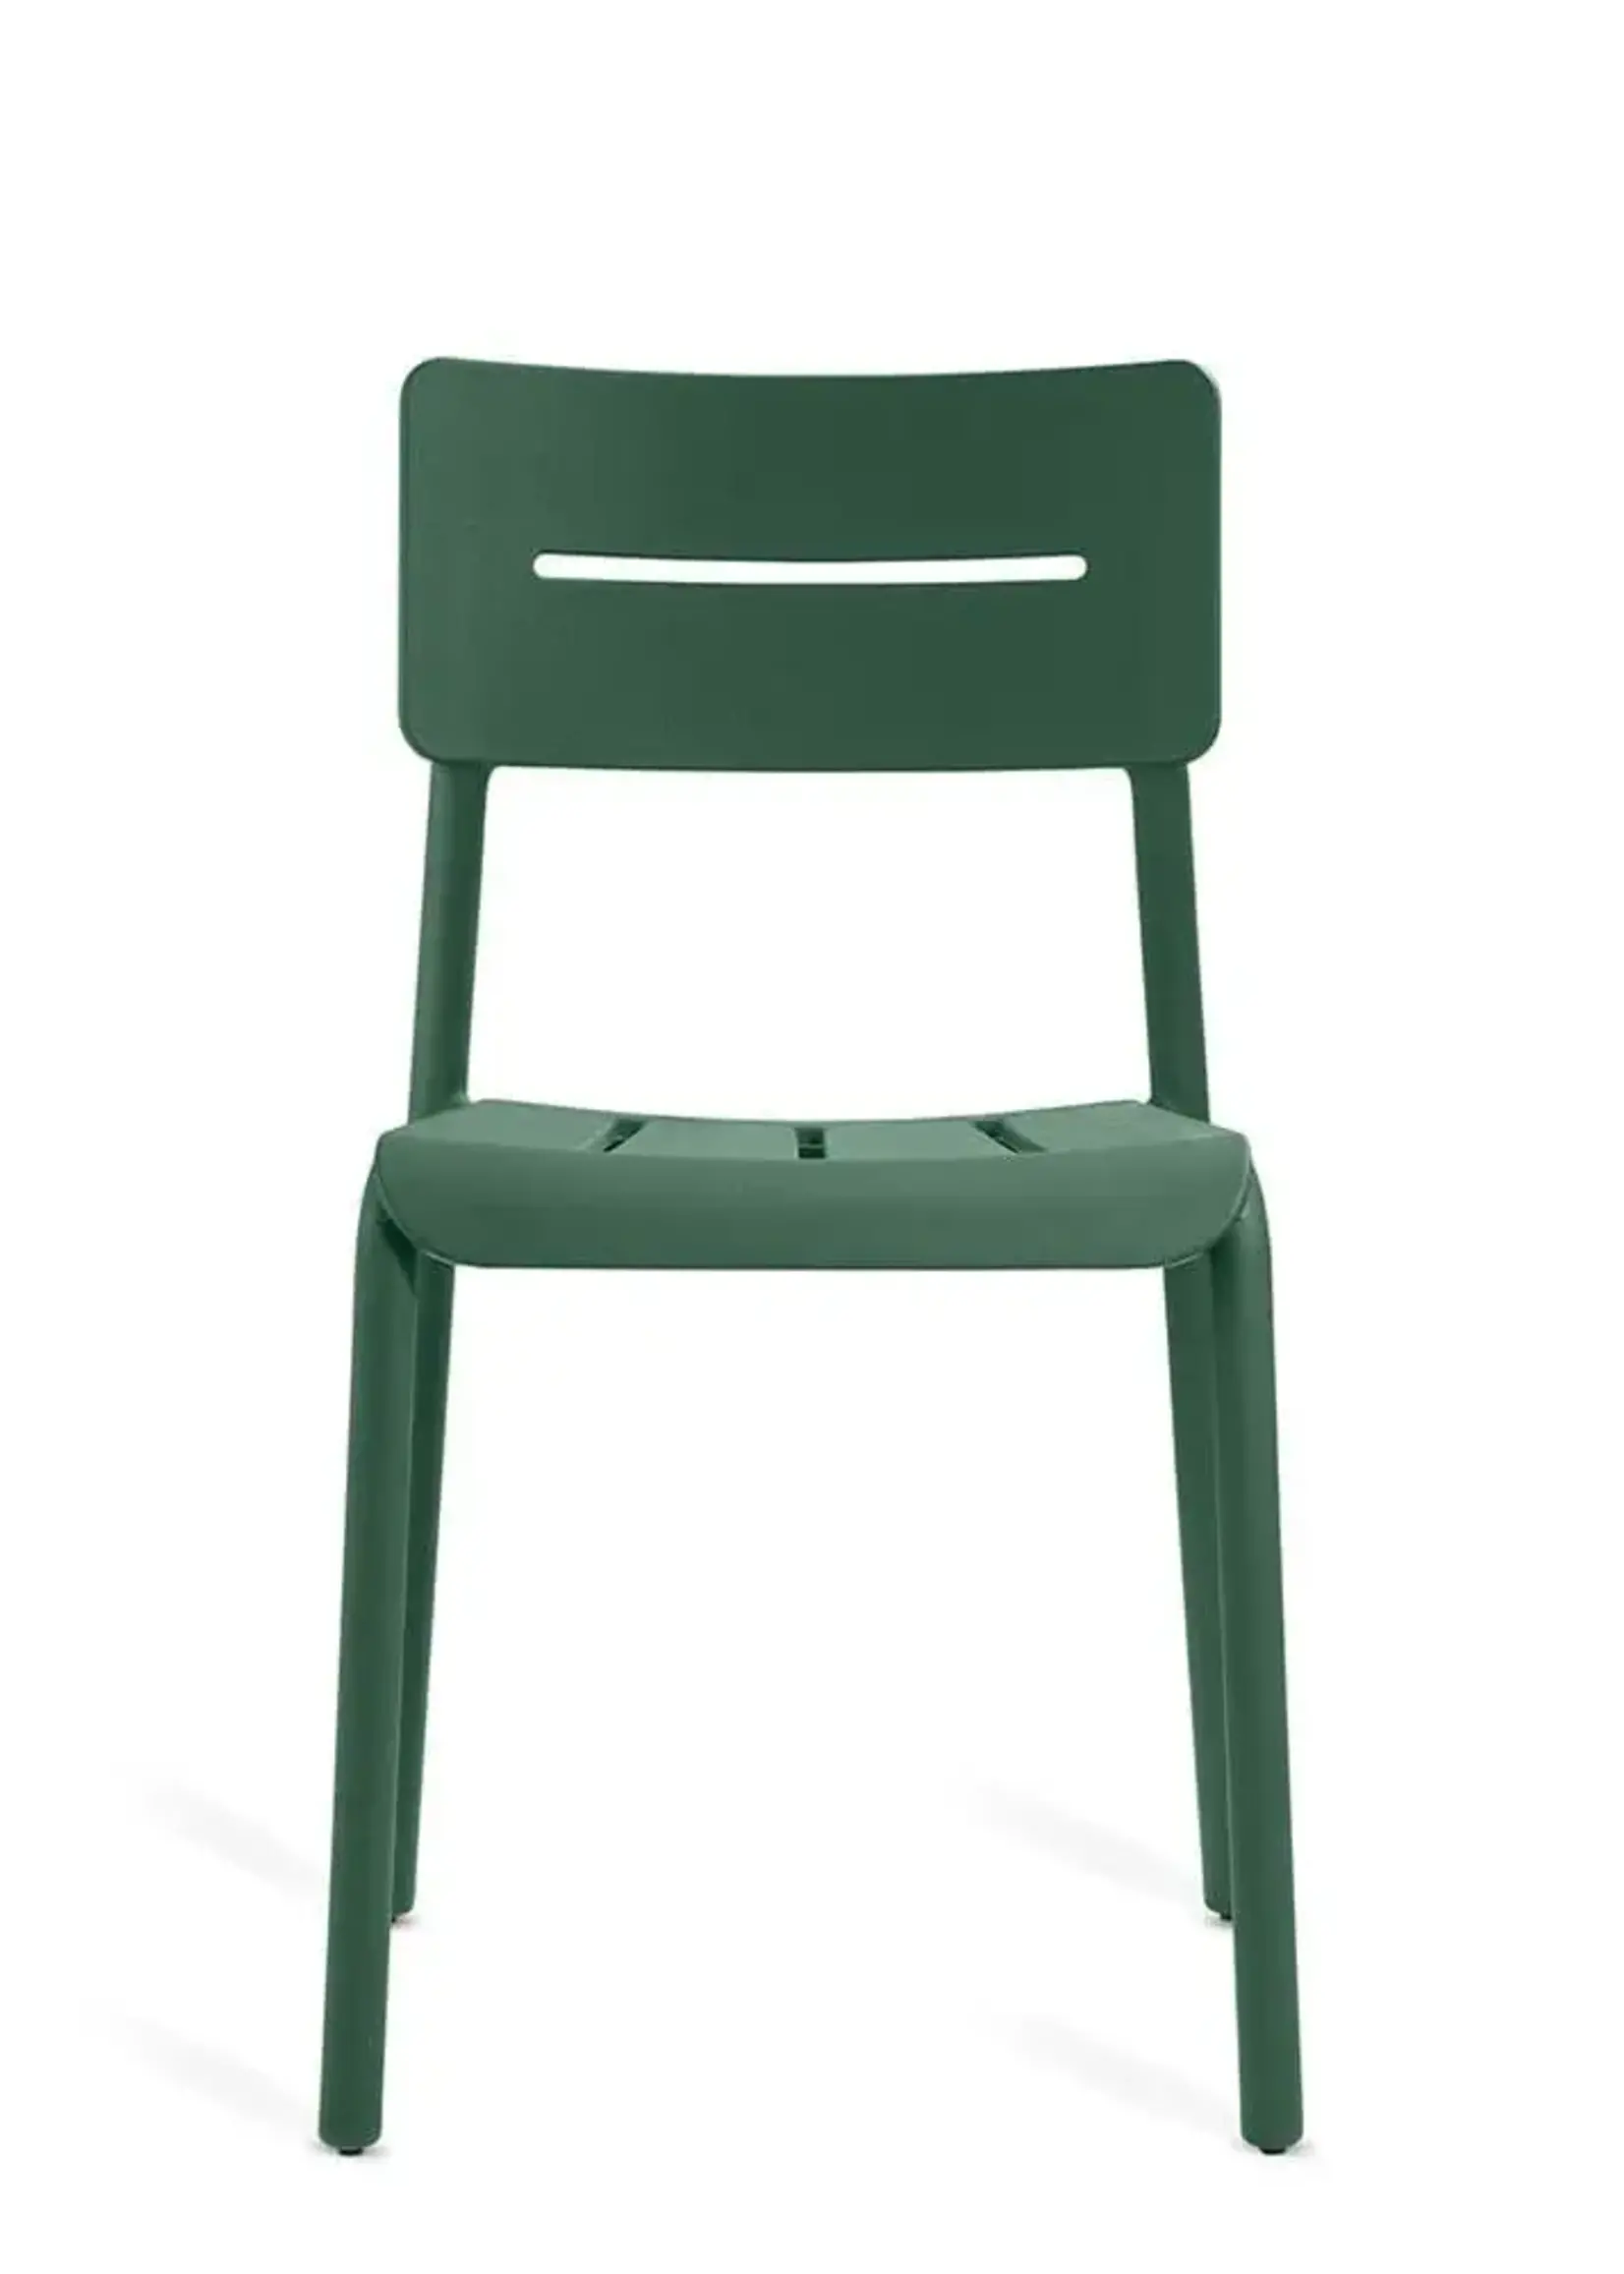 TOOU Chair OUTO (Choose Color)